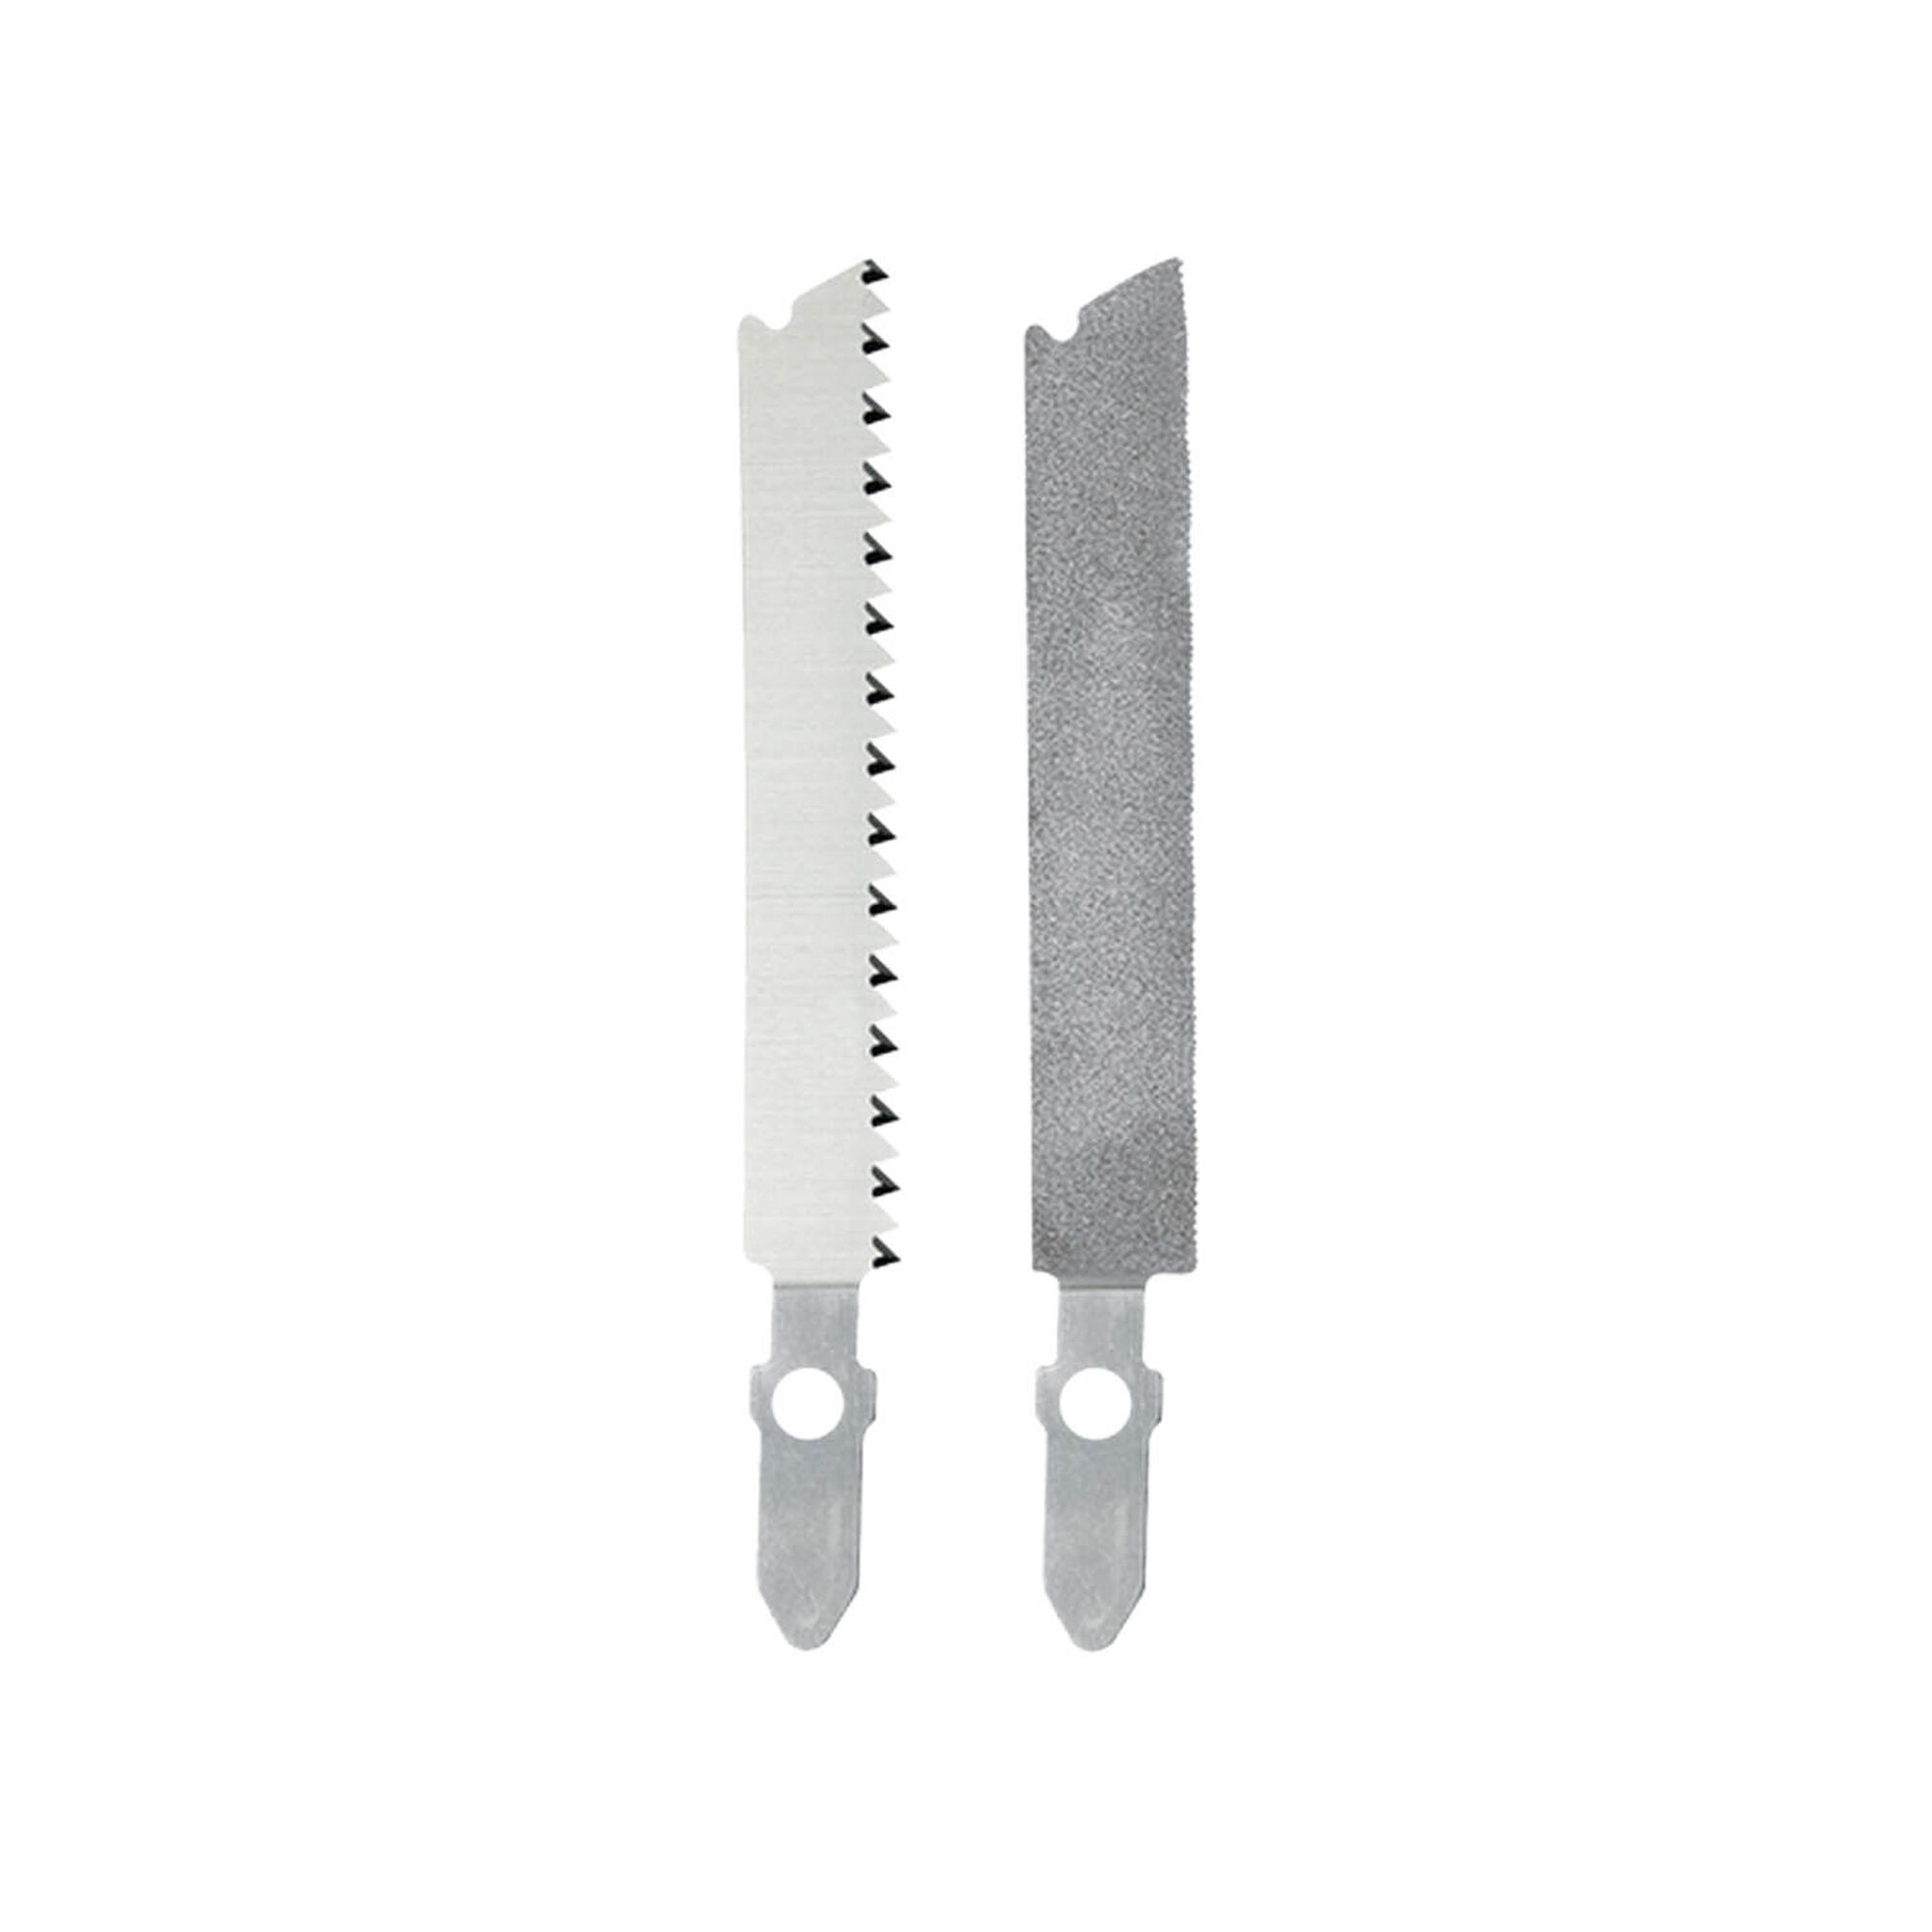 Stainless Steel Replacement Blades 15 Pieces For Automatic